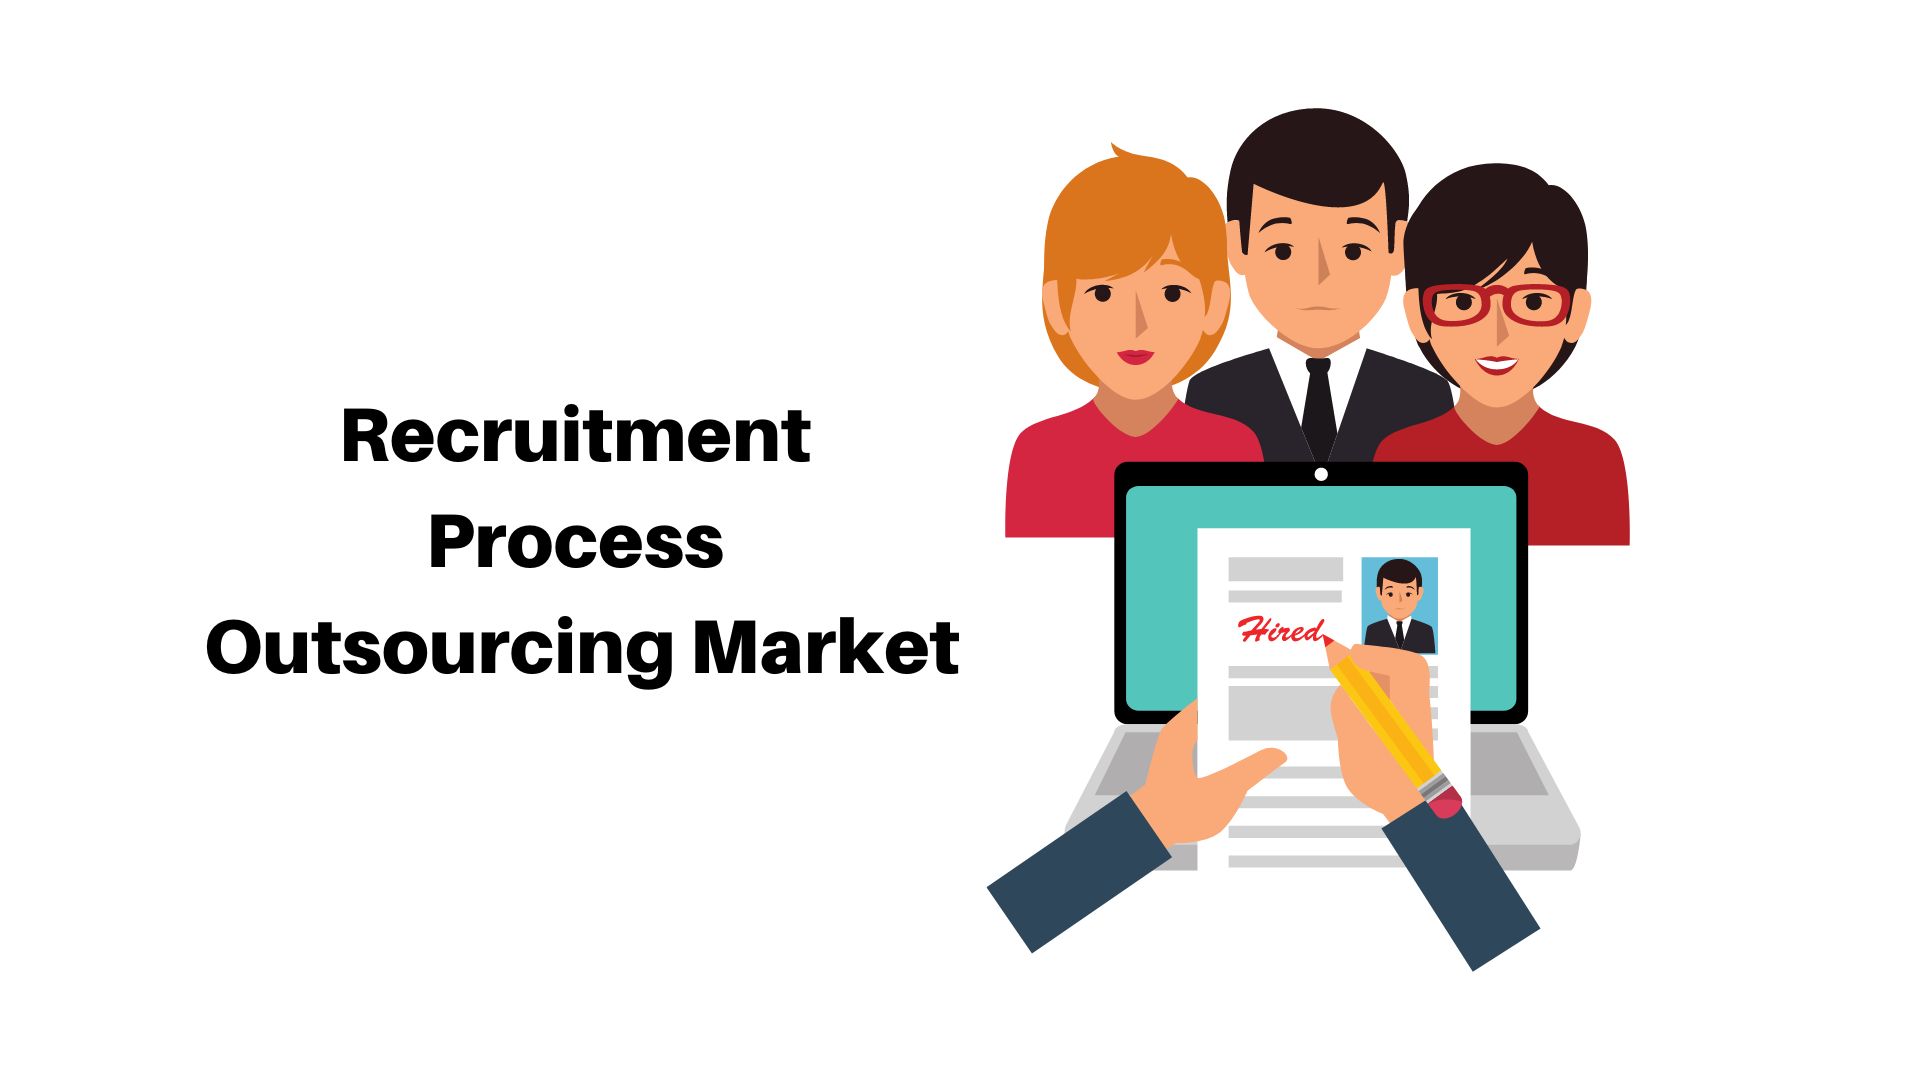 Recruitment Process Outsourcing Market Expected to Expand at a Growing CAGR of 17.7% through 2033